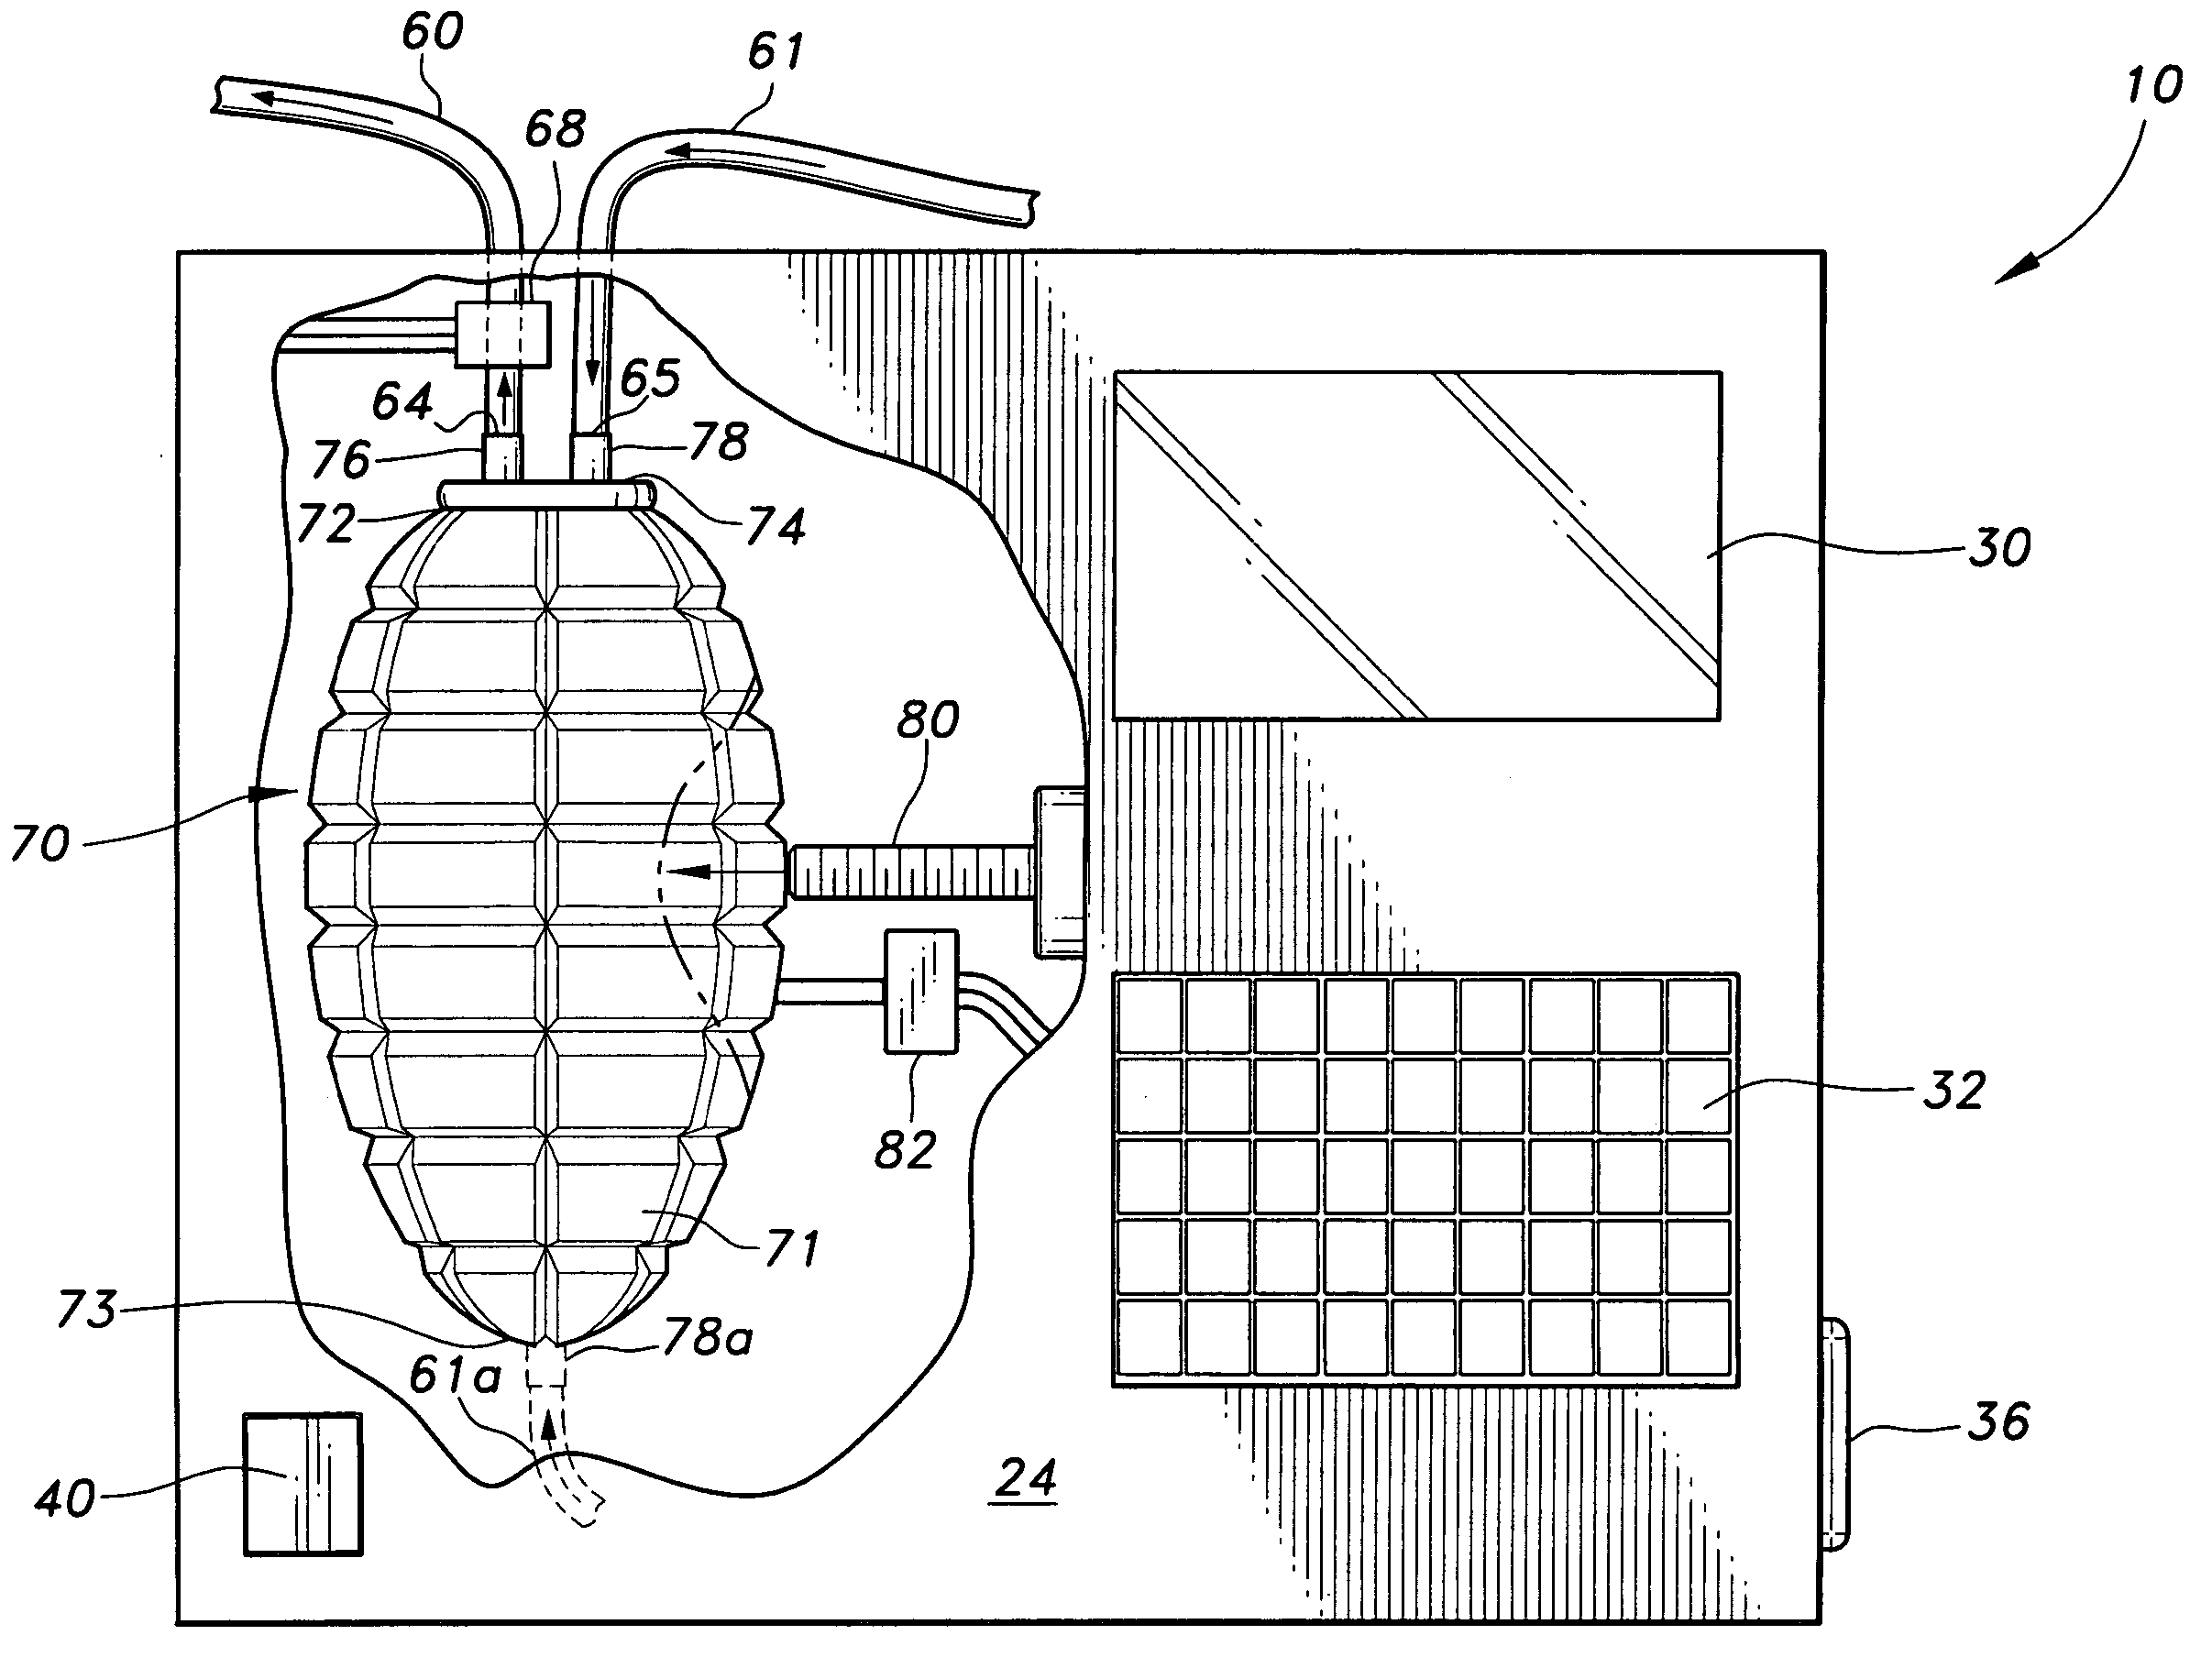 Continuous safe suction device